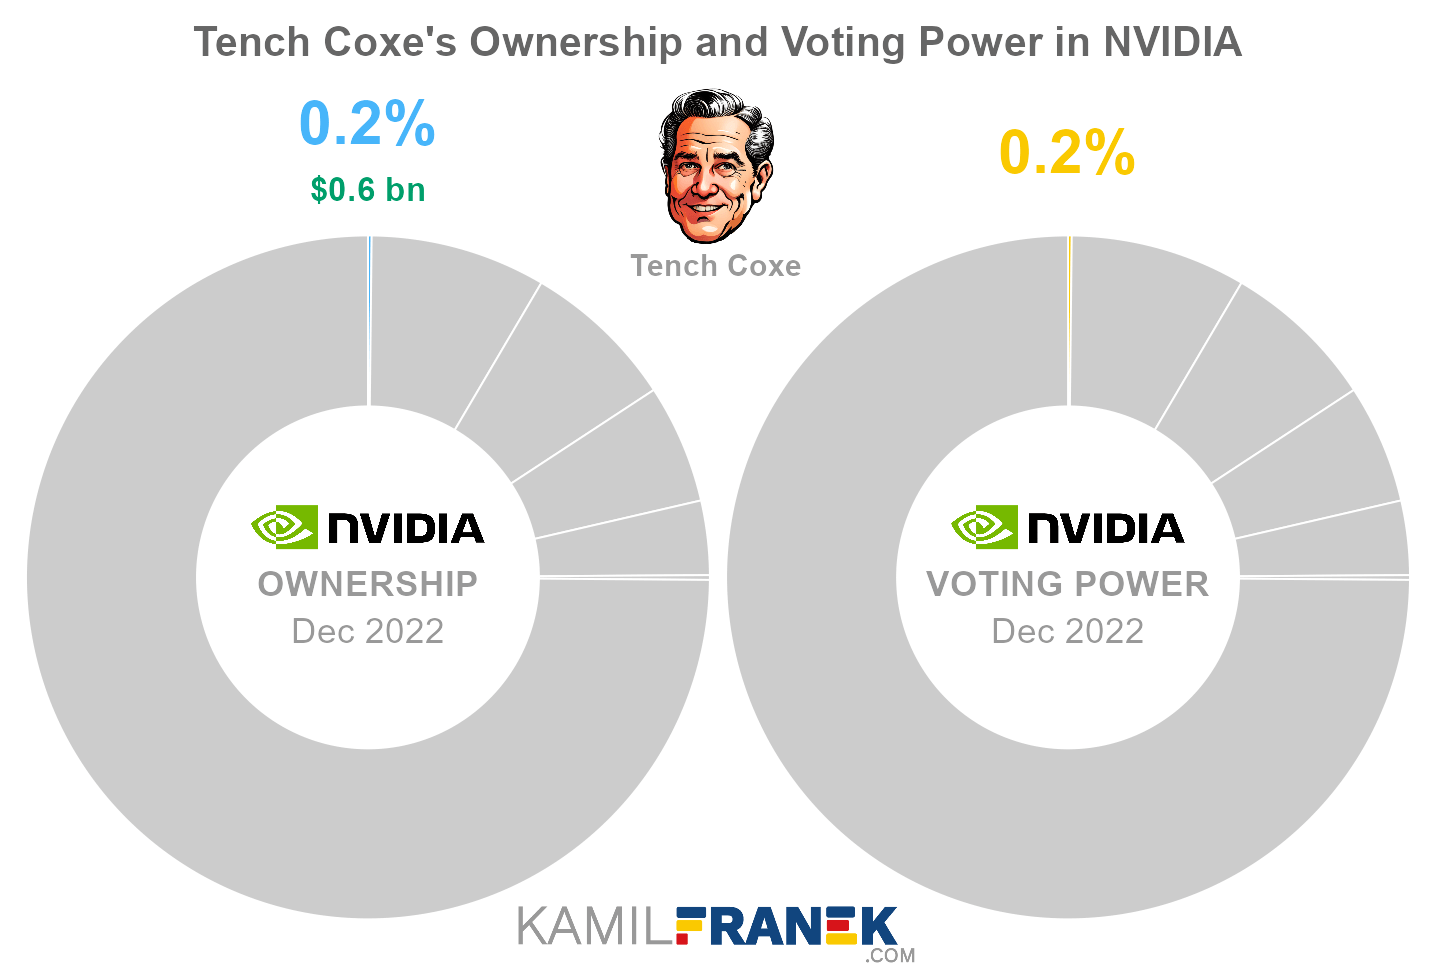 Tench Coxe's share ownership and voting power in NVIDIA (chart)